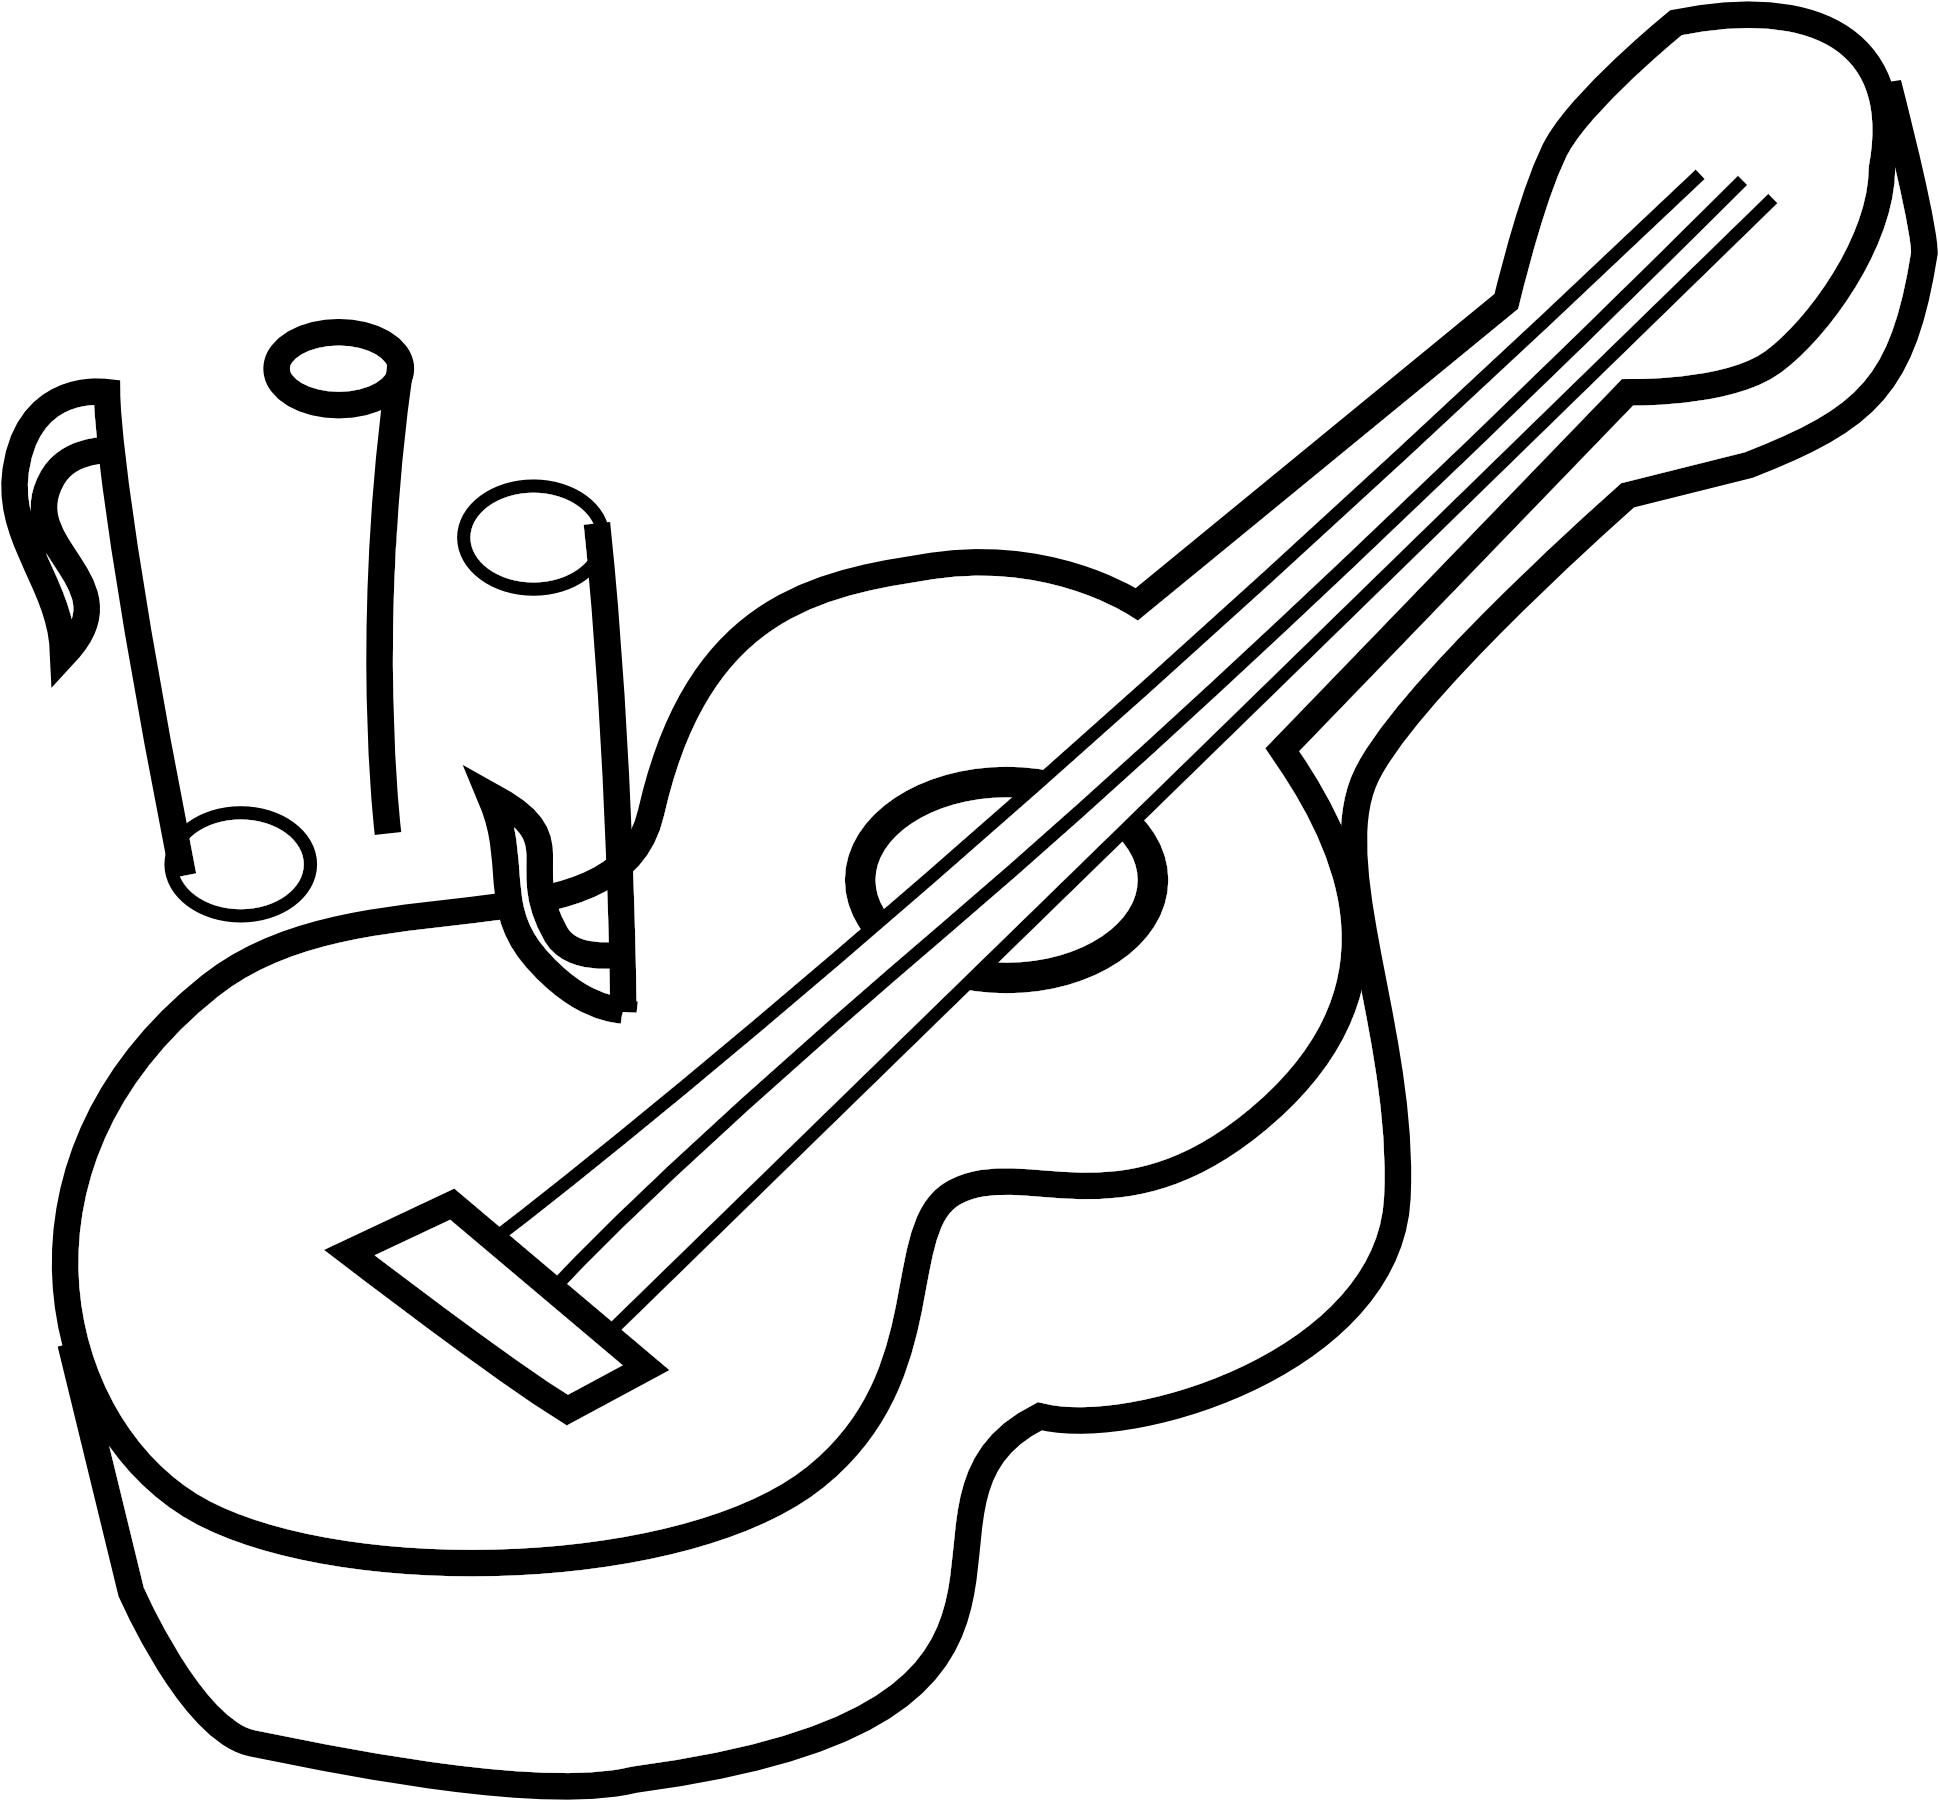 Clipart Of Guitar, Dylan And Surprising - Clip Art (1979x2799)